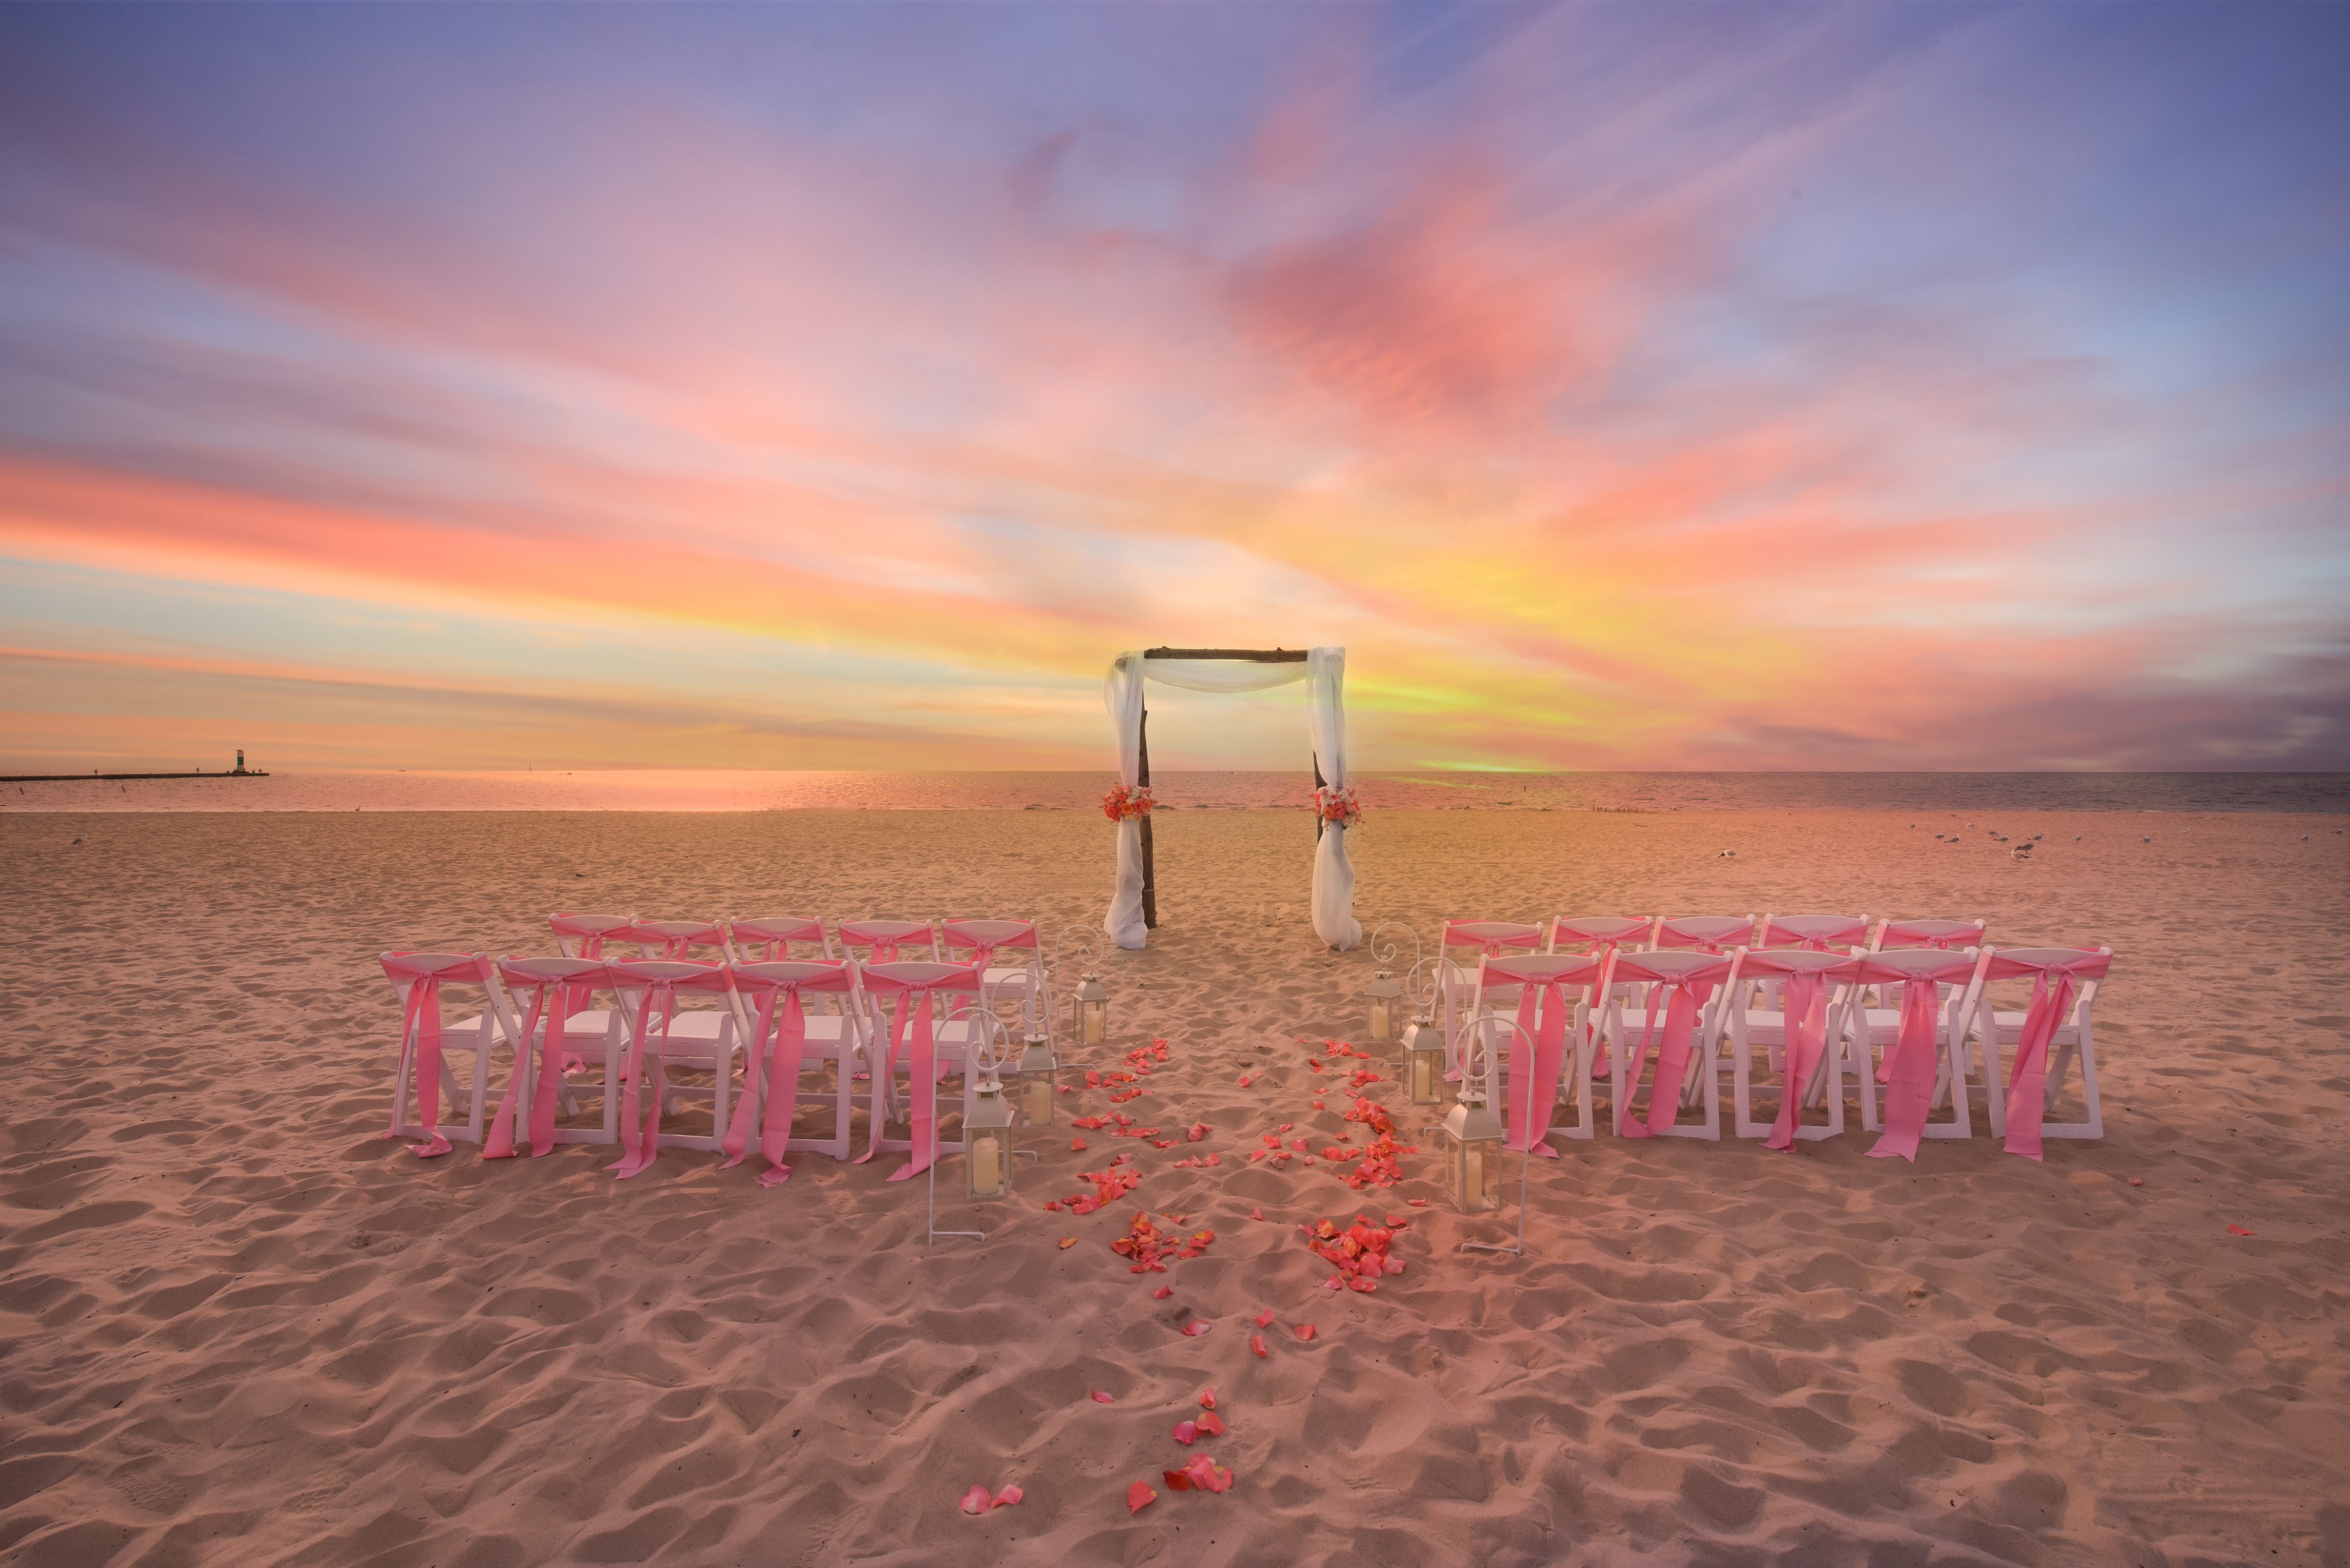 saugatuck wedding planners coordinated this beach wedding in south haven